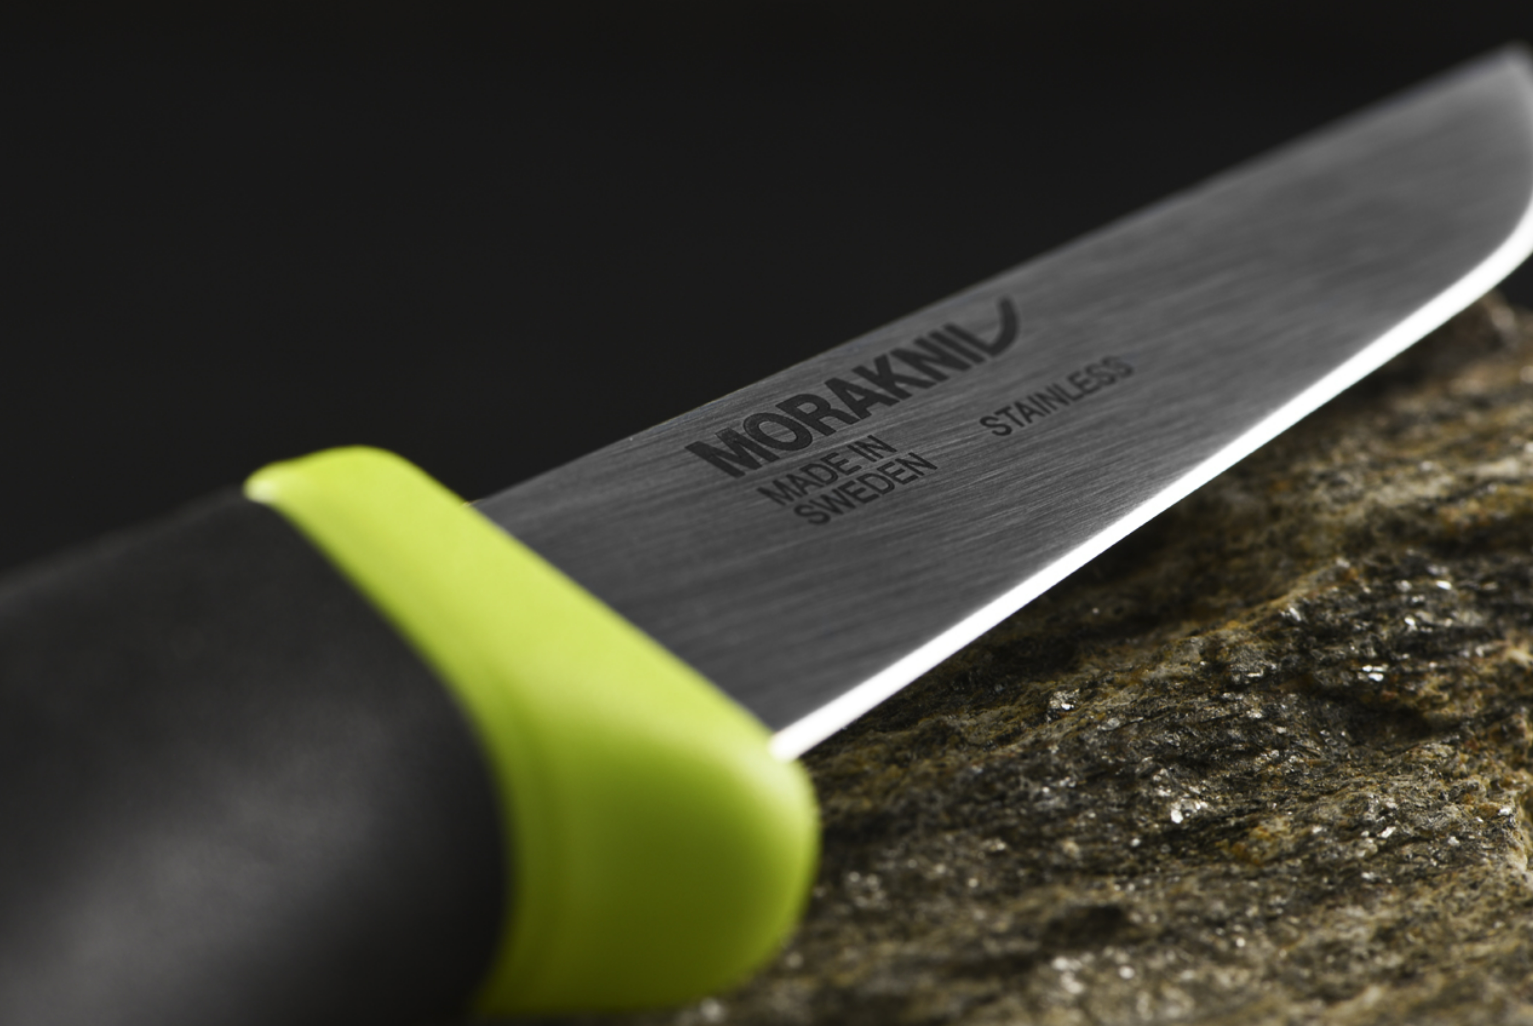 Fishing Knives - Designed With The Angler In Mind